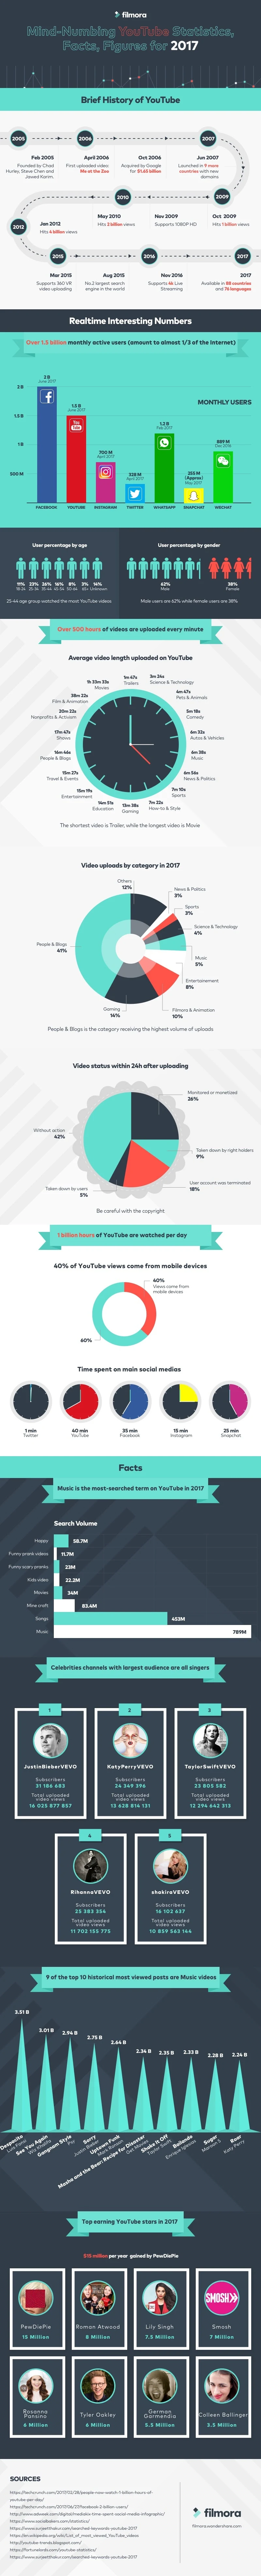 20+ Mind-Numbing YouTube Facts, Figures and Statistics - #infographic